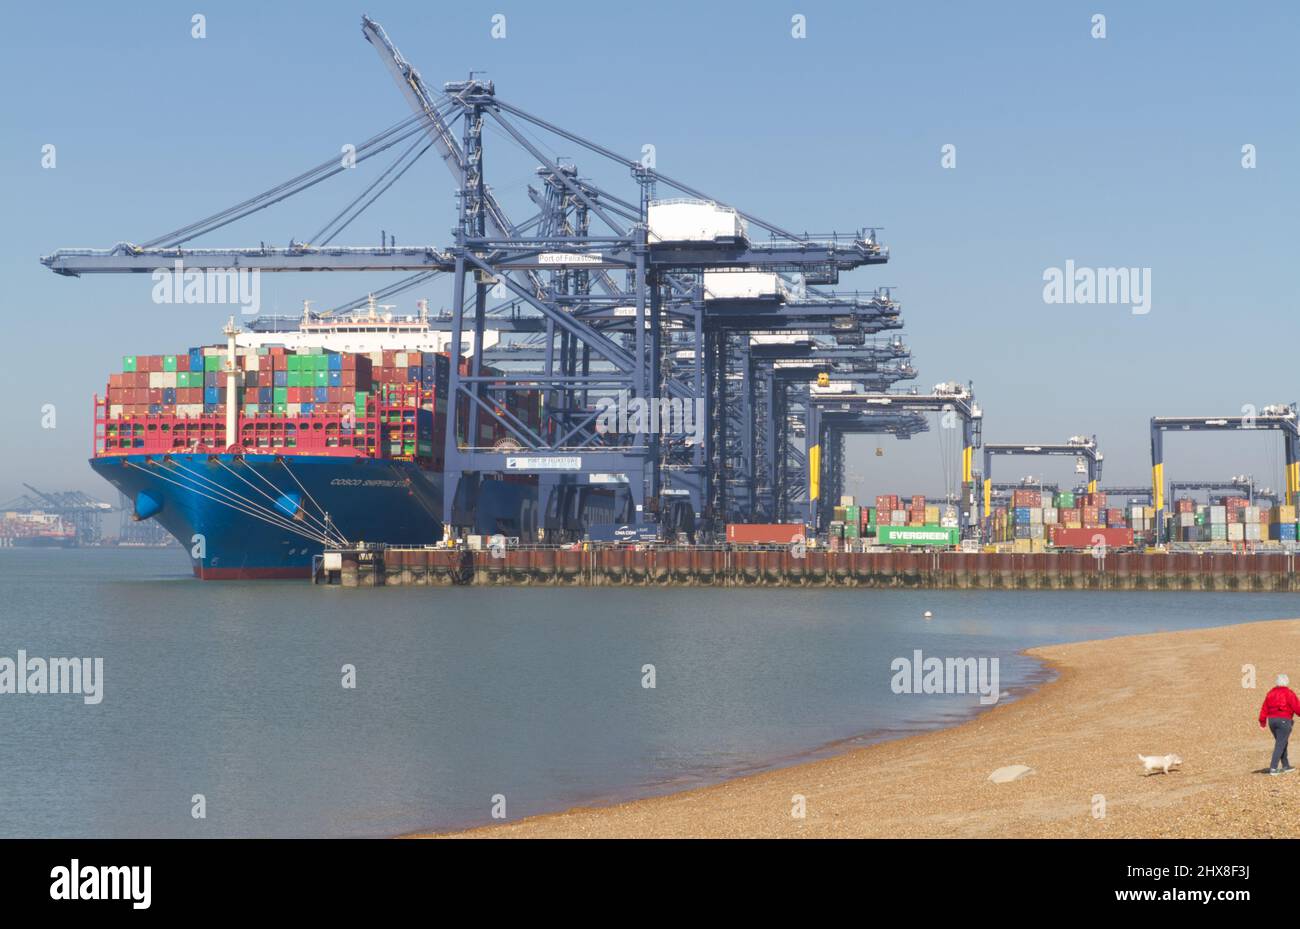 Port of Felixstowe in Suffolk with the container ship 'Cosco shipping star' in dock. Felixstowe is part of Freeport East, a hub for global trade Stock Photo